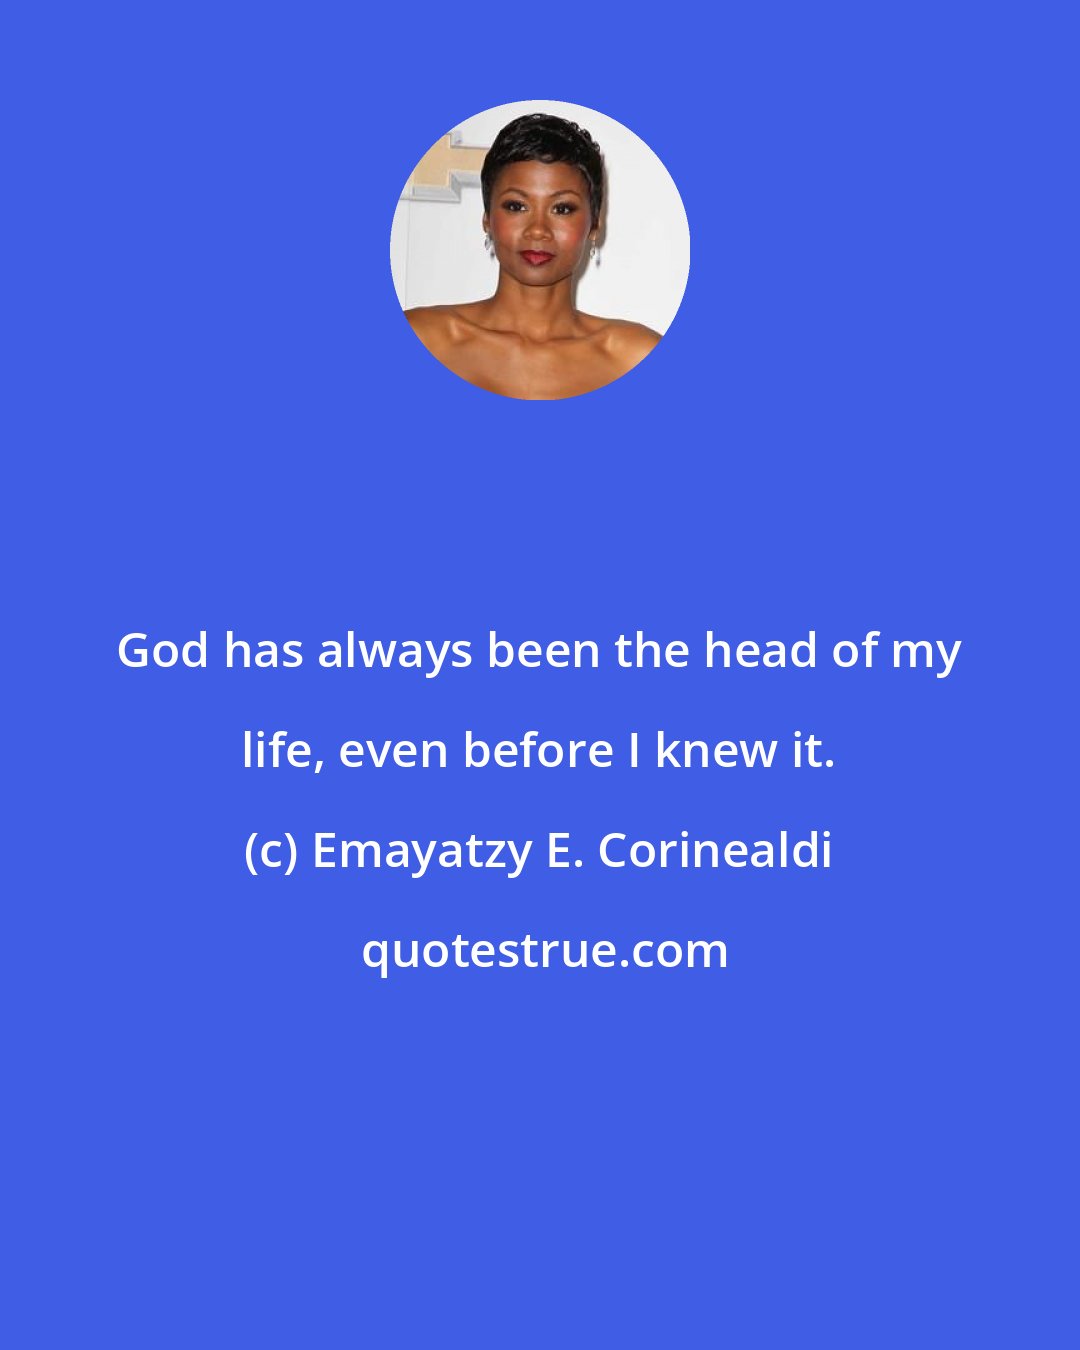 Emayatzy E. Corinealdi: God has always been the head of my life, even before I knew it.